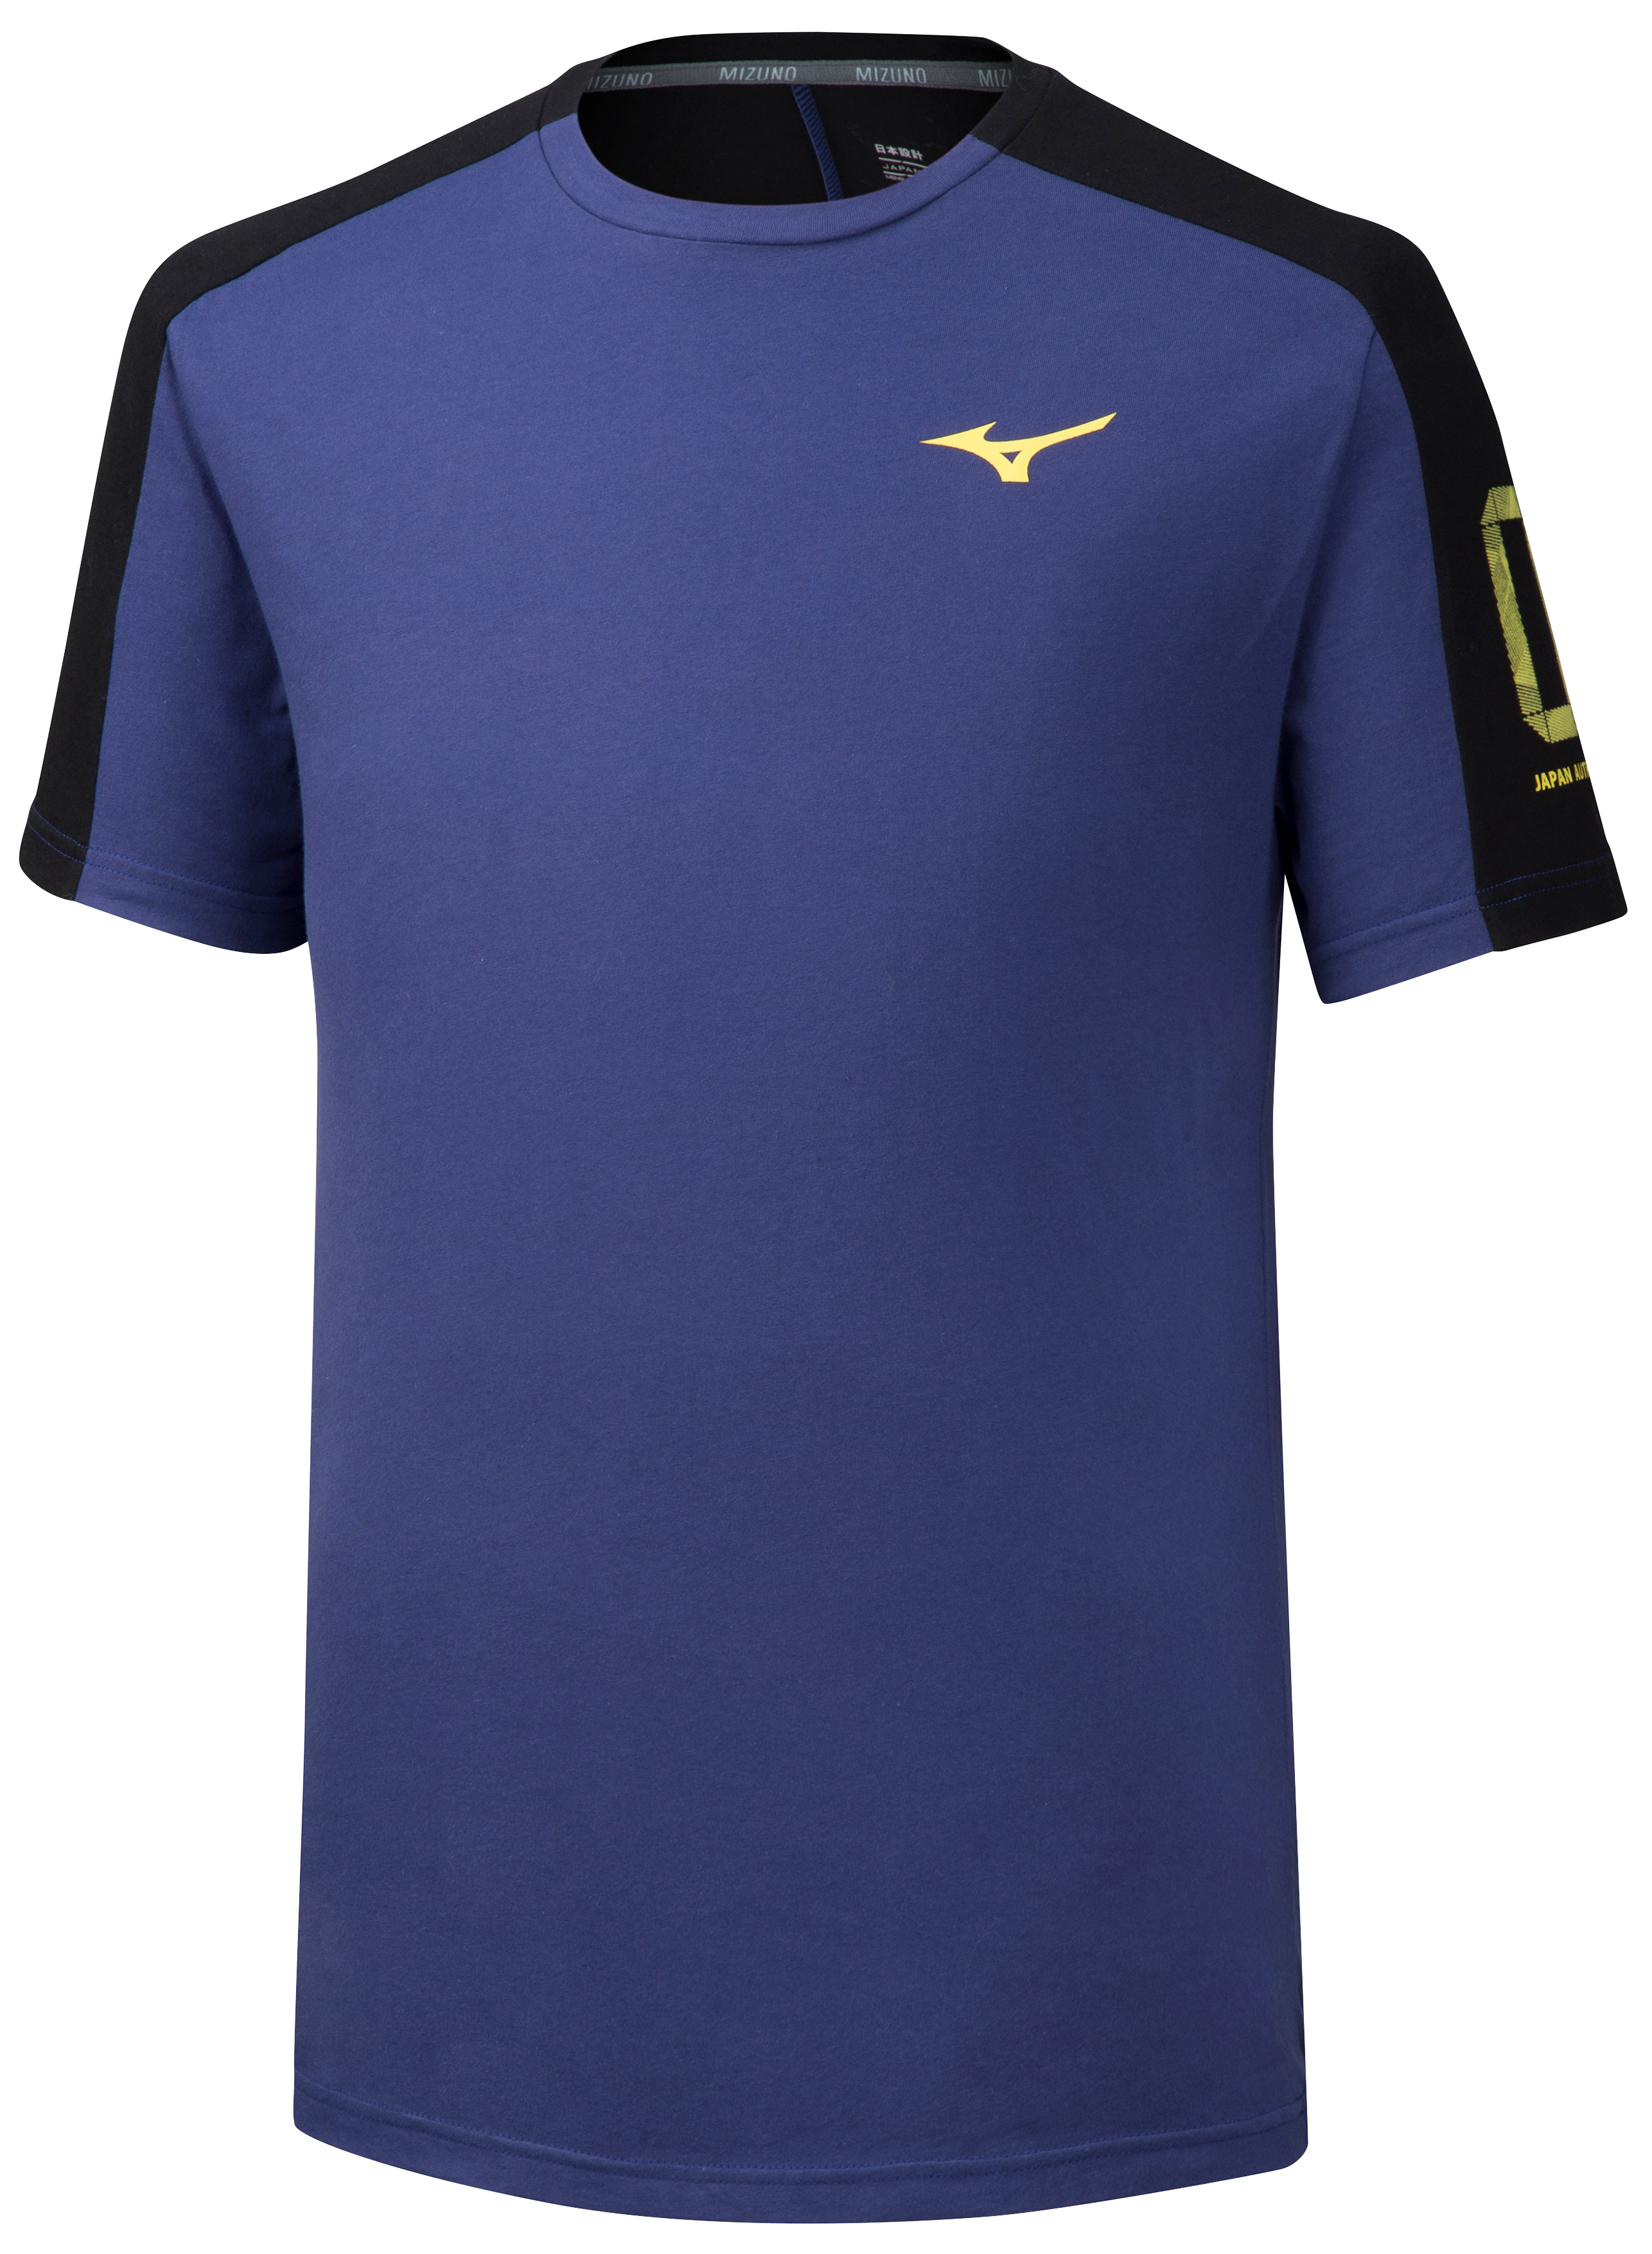 Mizuno Mens Heritage 1906 Running T Shirt Tee Top Blue Sports Breathable 